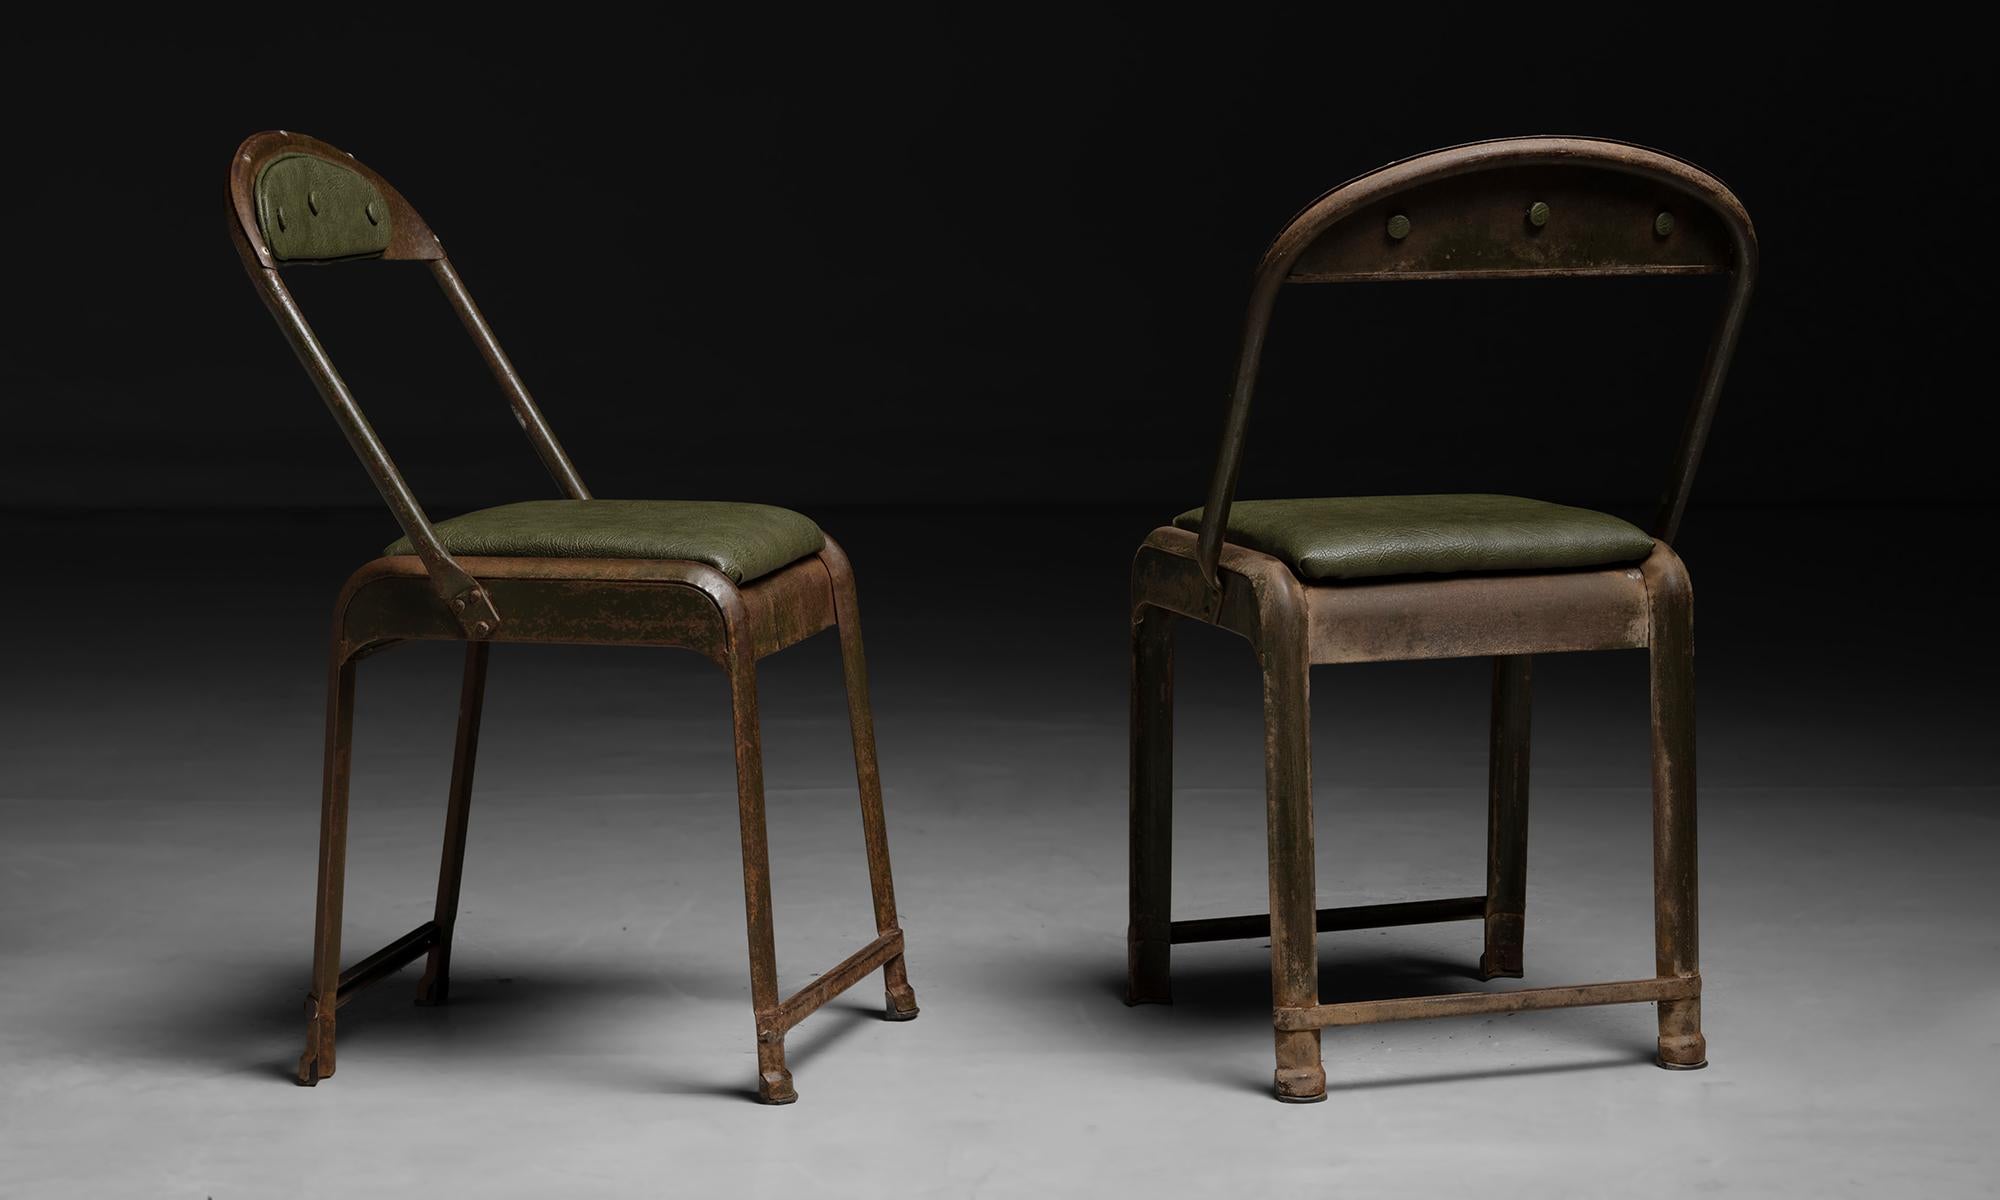 Industrial Evertaut Factory Chairs, England circa 1950